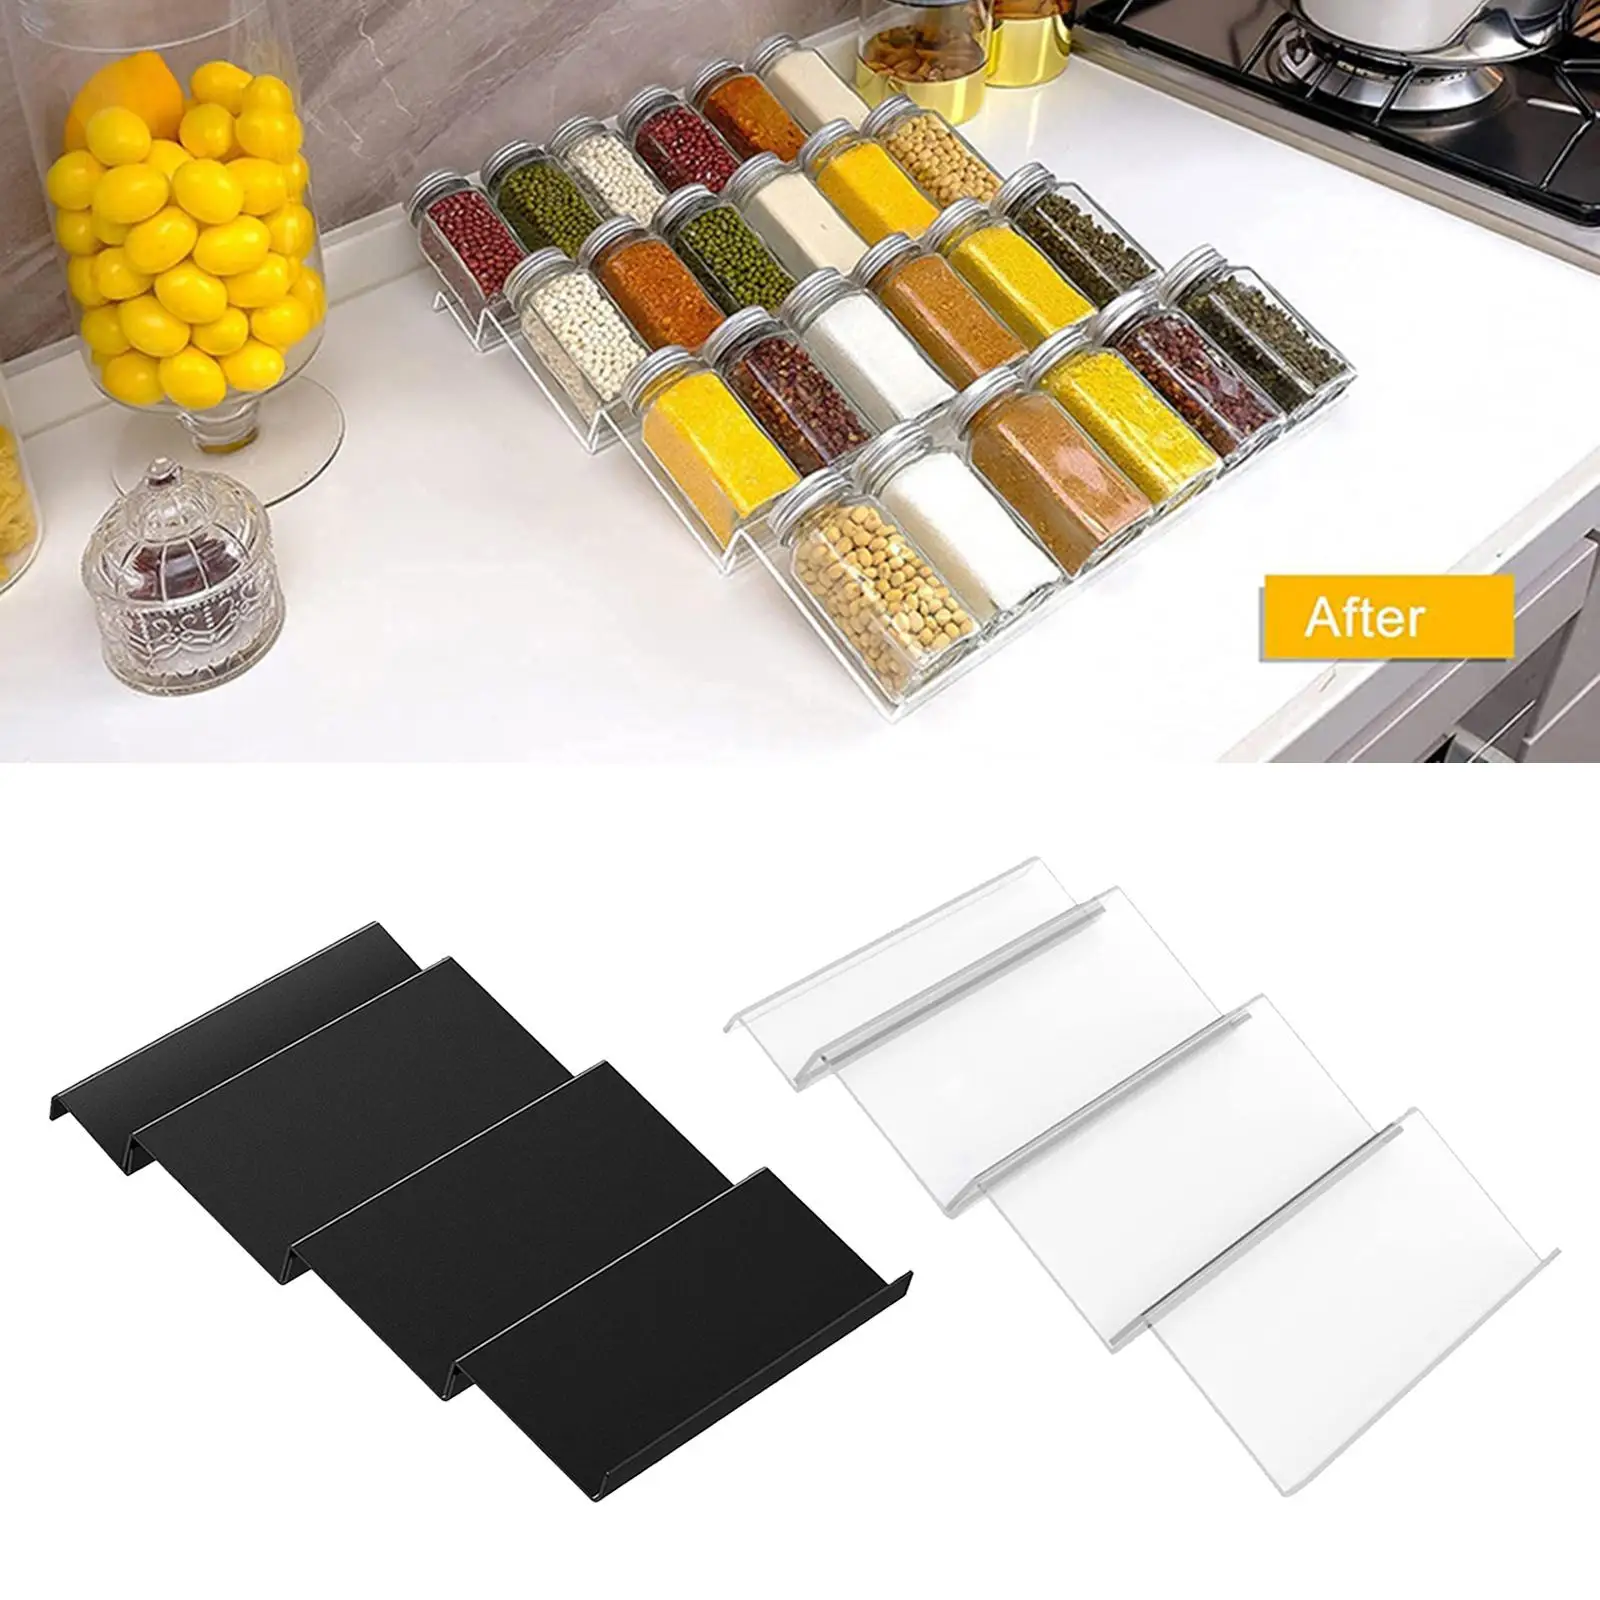 Acrylic Spice Drawer Organizer 4 Layer Spiace Bottle Storage for Cabinet